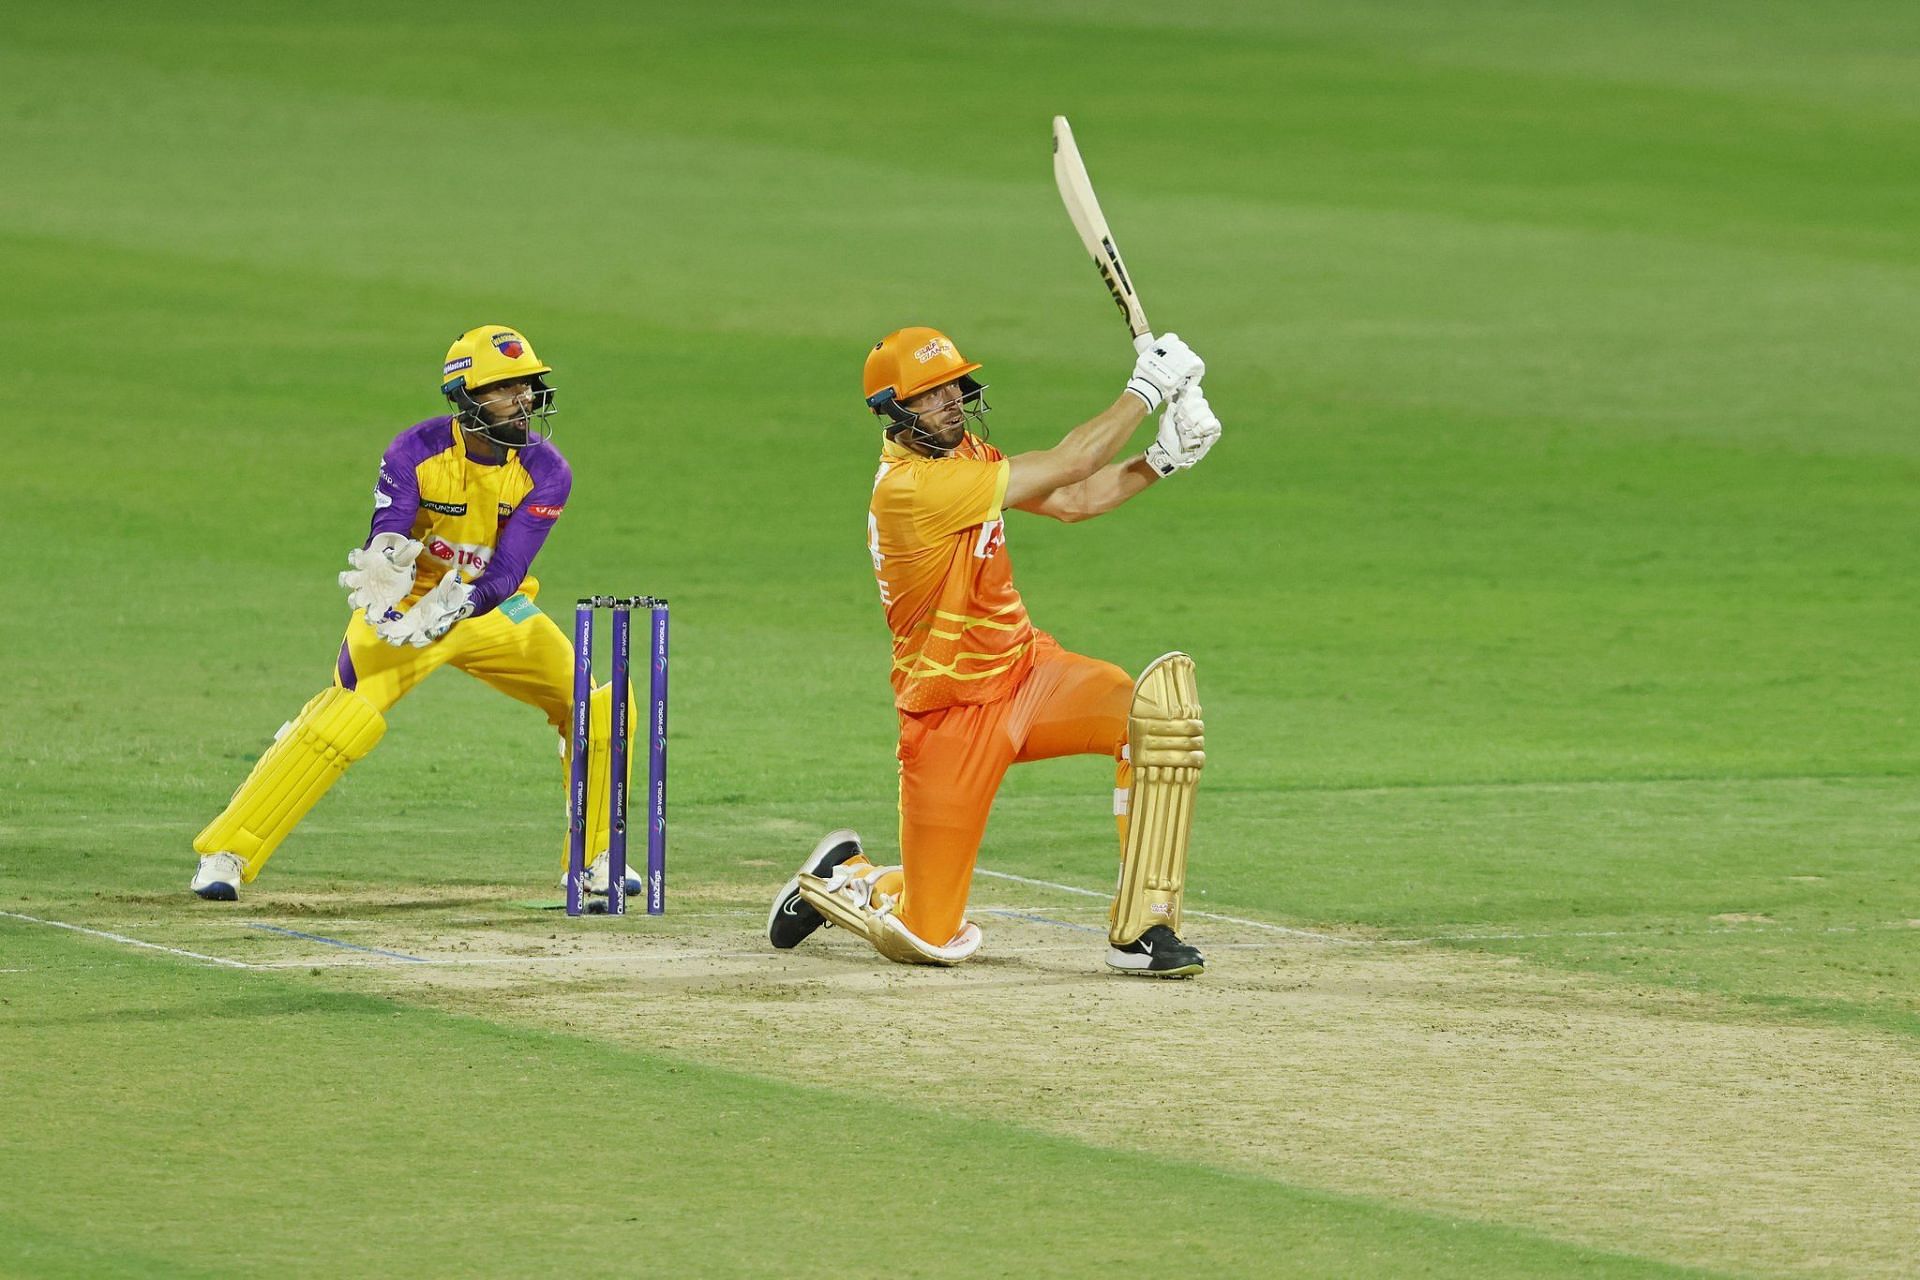 James Vince in action (Image Courtesy: X/International League T20)